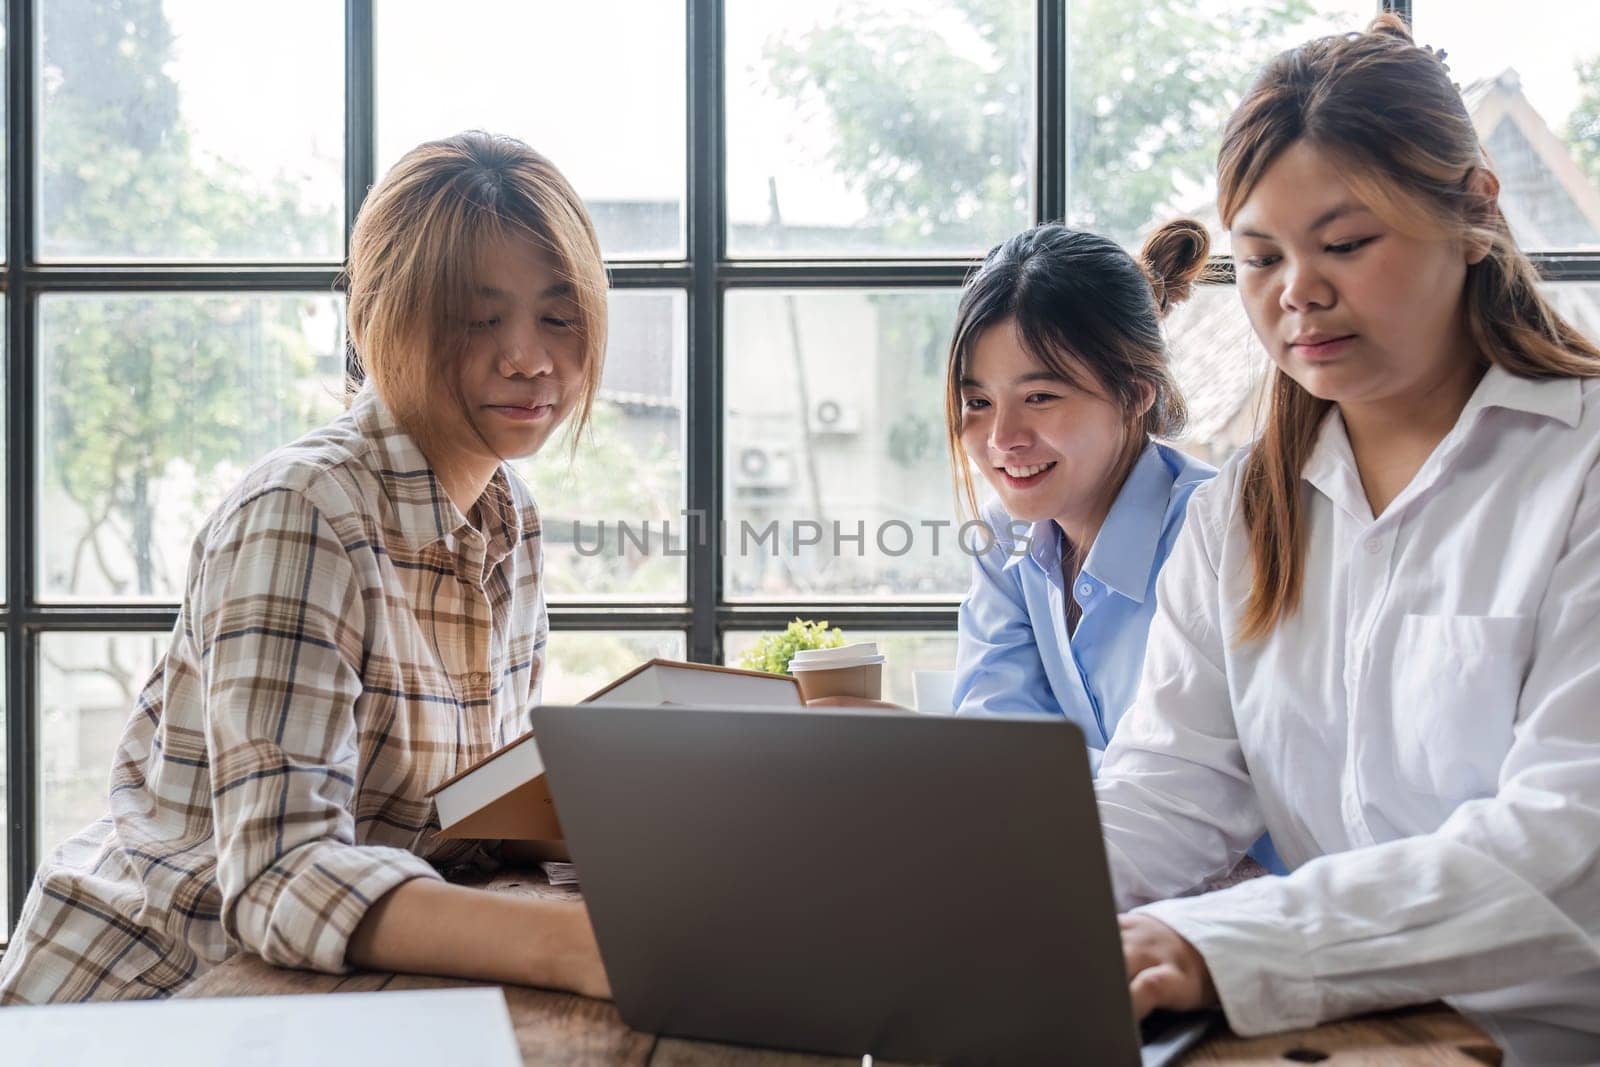 Asian College groups of students using laptop, tablet, studying together with notebooks documents paper for report near windows in classroom. Happy young study for school assignment